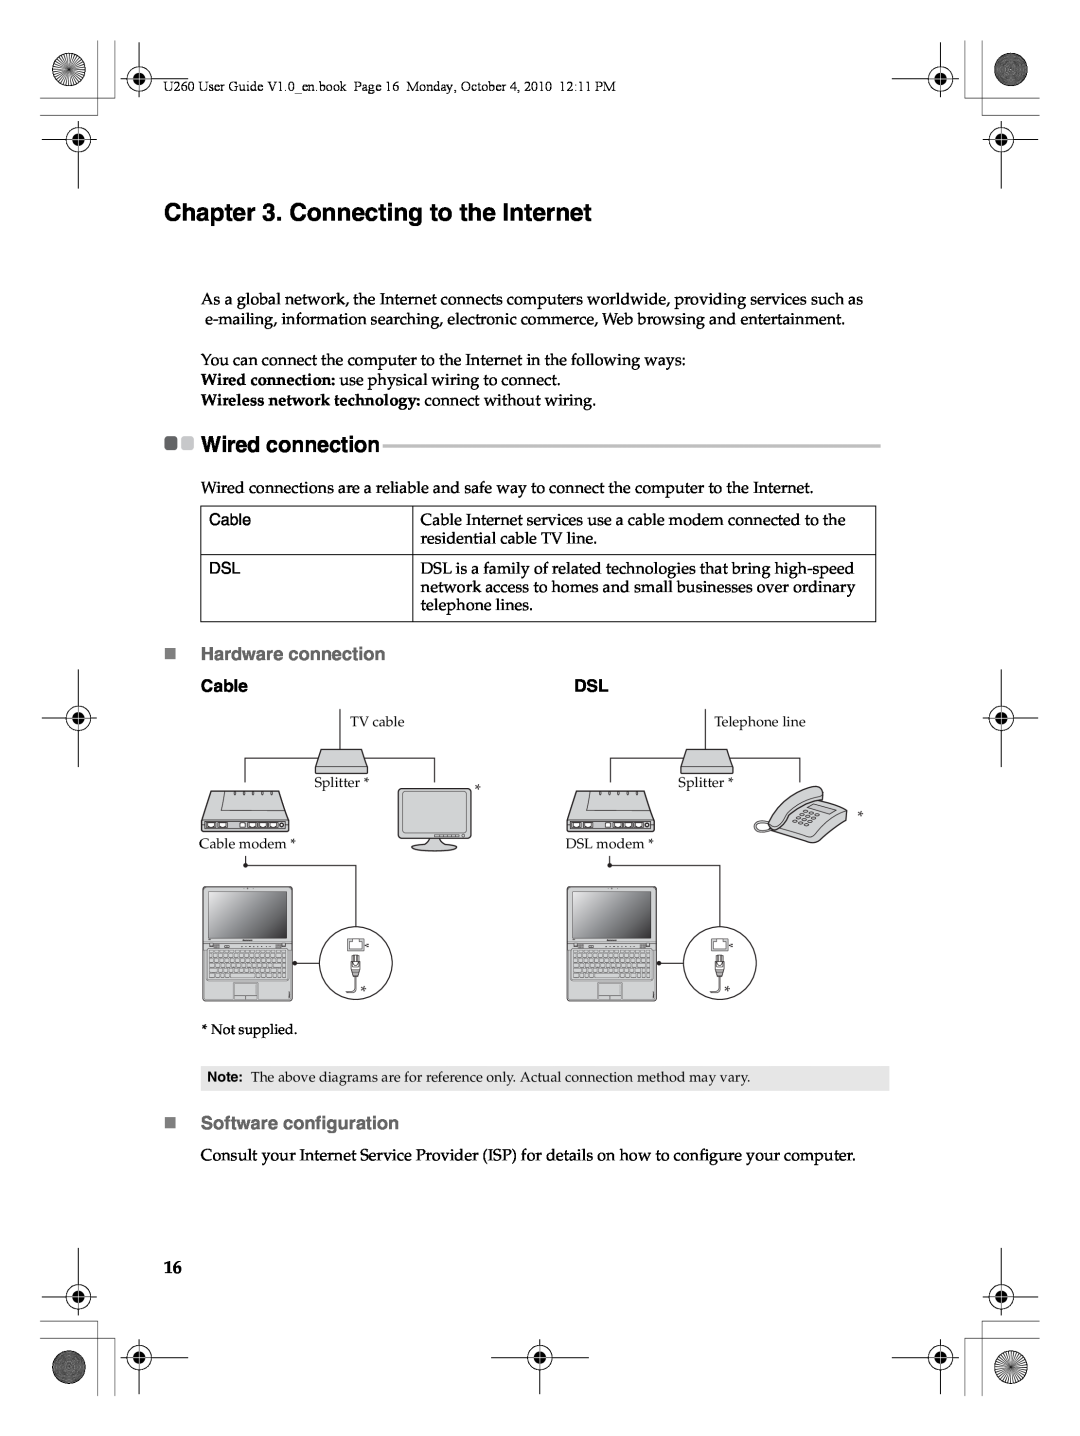 Lenovo U260 manual Connecting to the Internet, Wired connection, Cable 